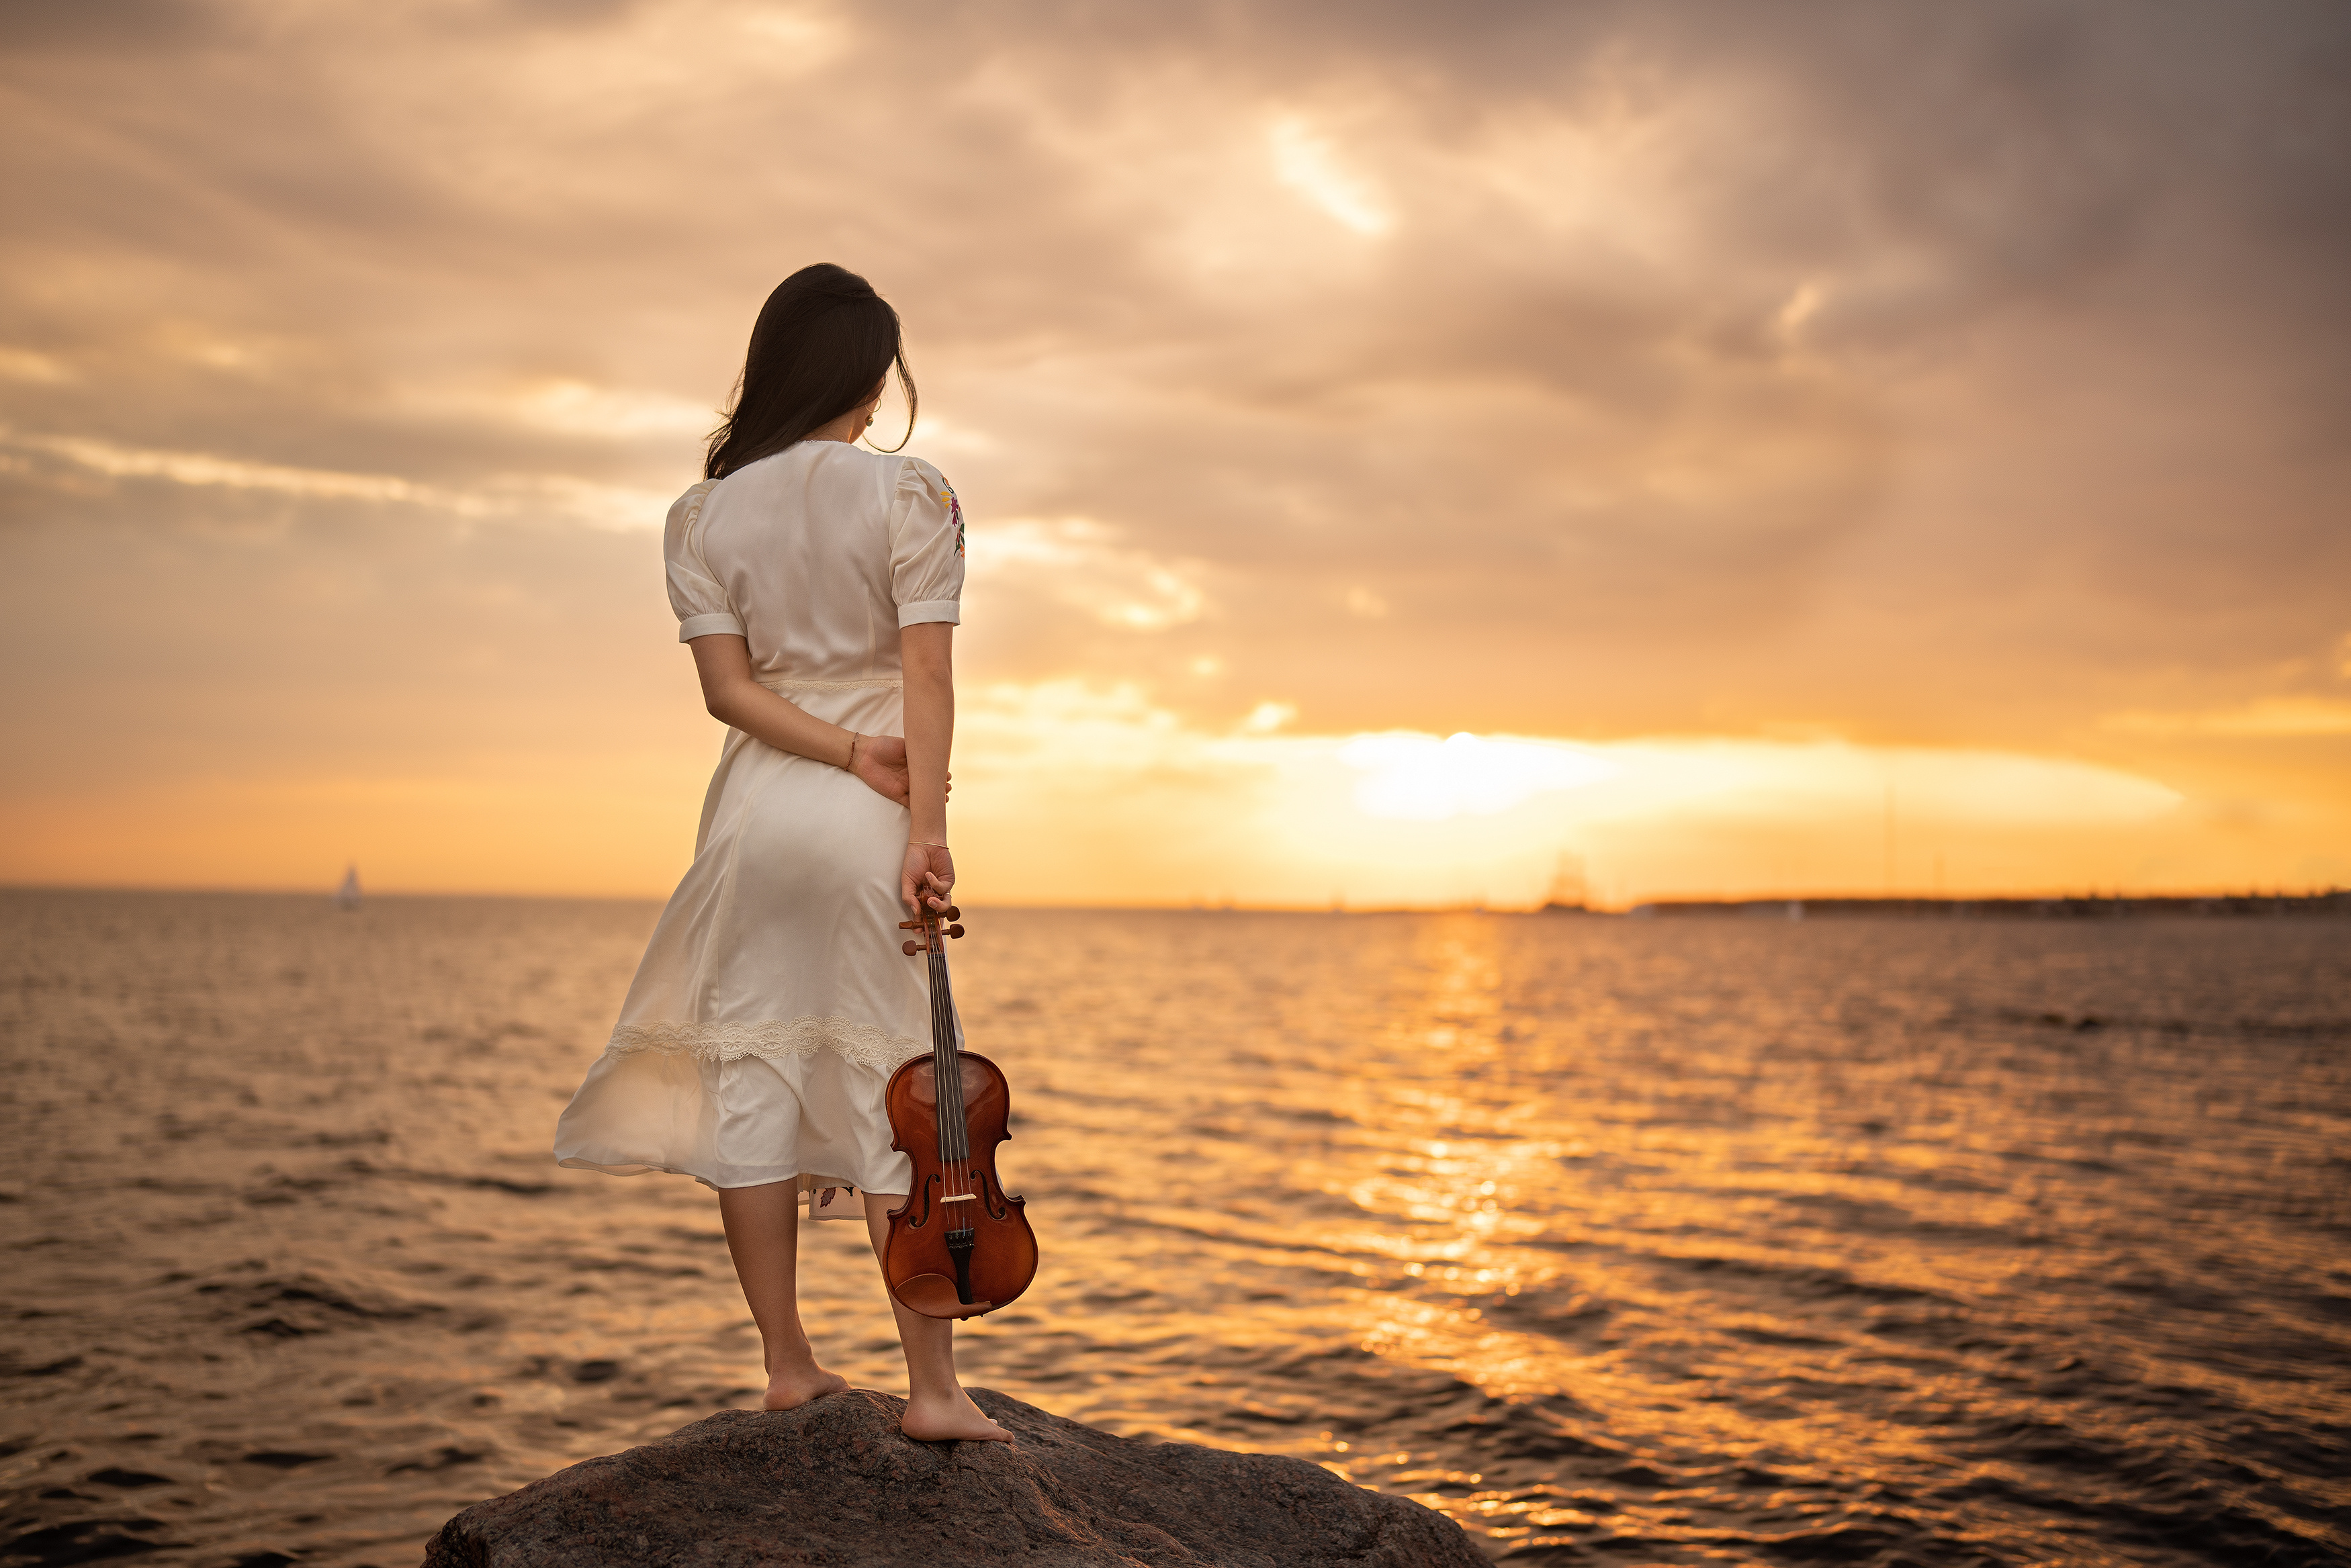 Wallpapers young woman nature violin on the desktop